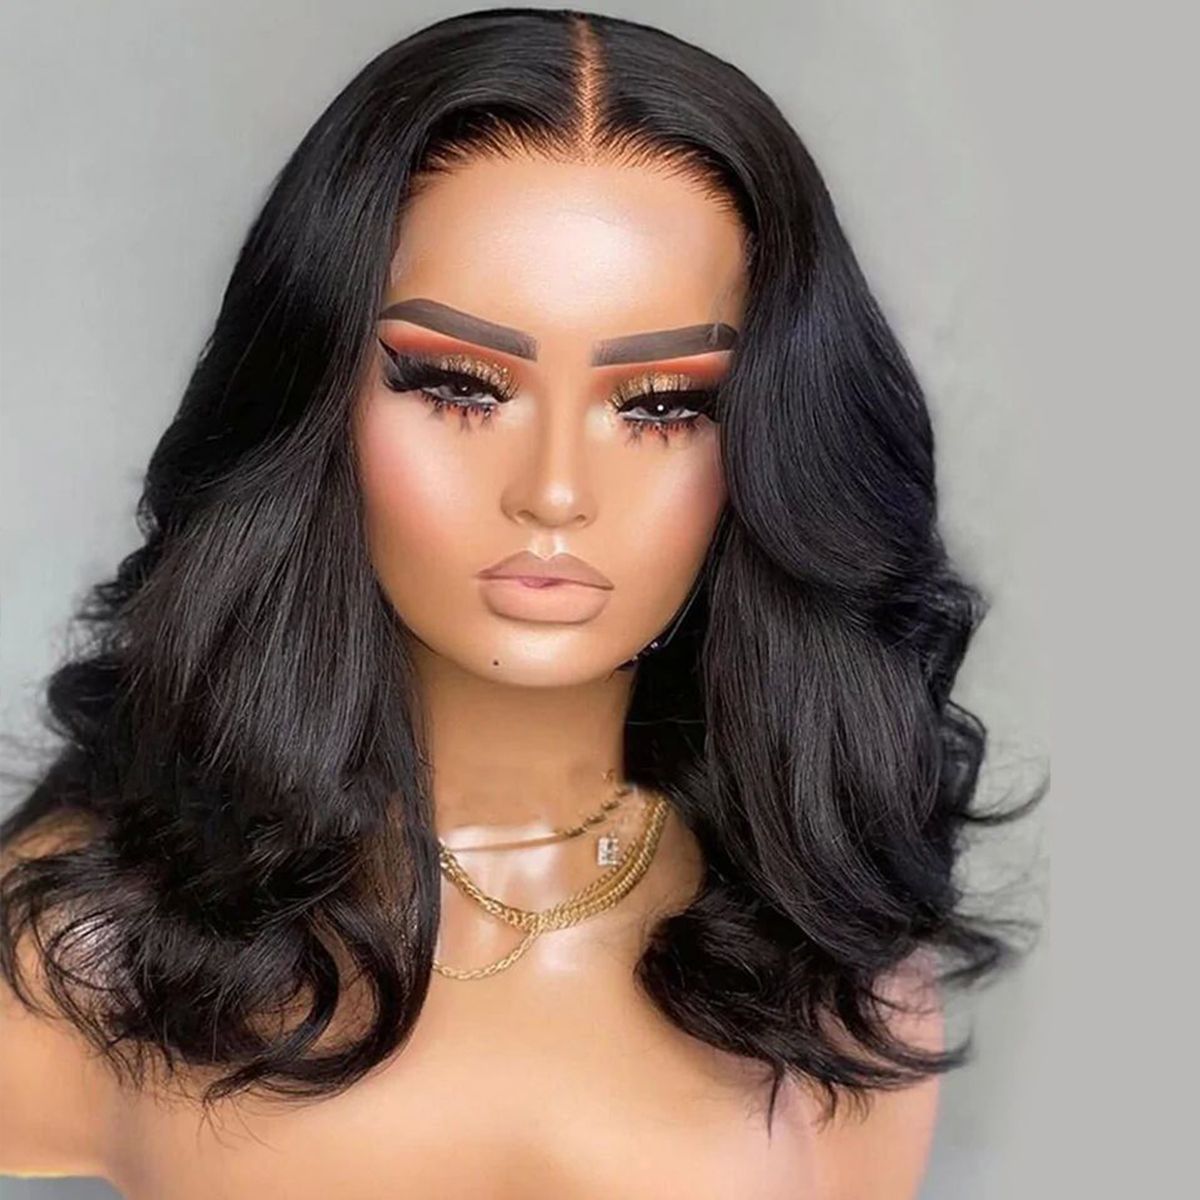 adjustable removable extra elastic band for lace wigs glueless wig